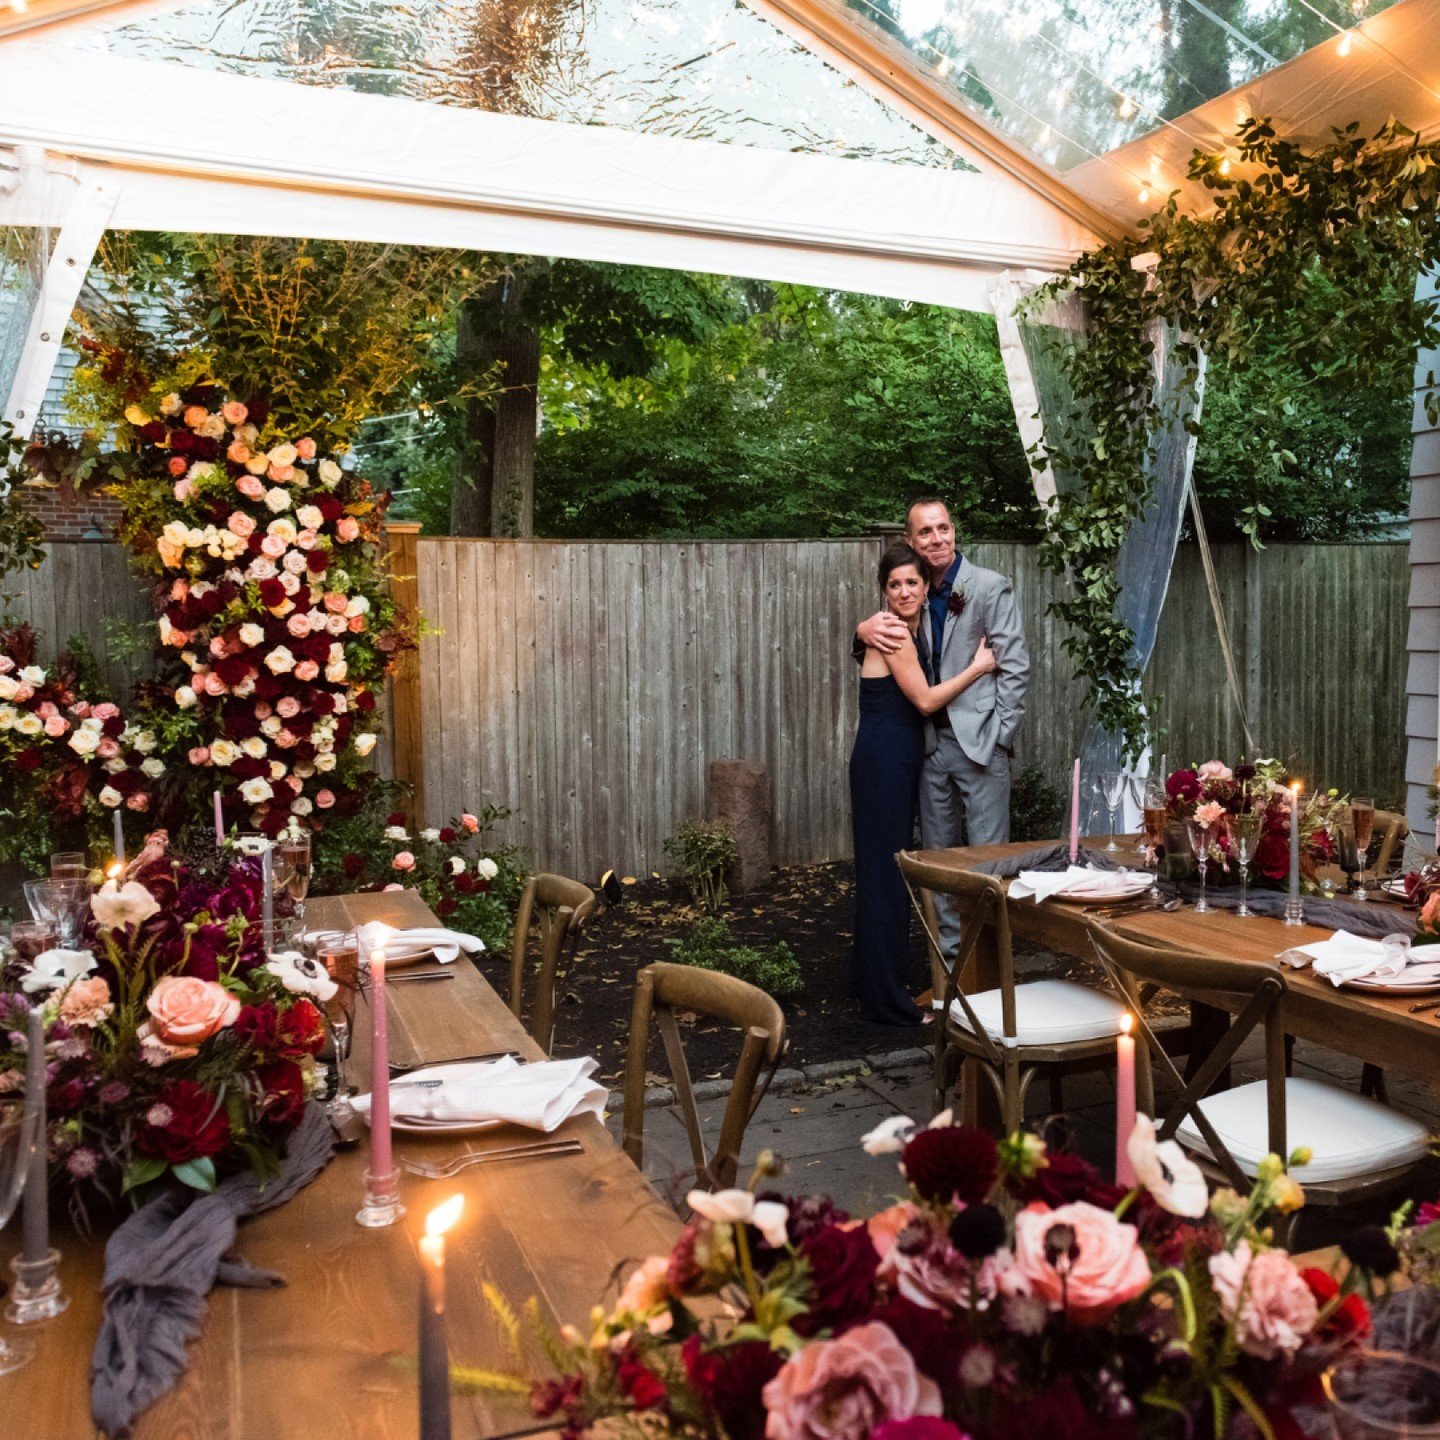 Small space, big reveal! 

K &amp; B celebrated their wedding with fourteen of their closest friends and family under a clear top tent on a perfect October night. 

.
.
Photography: @leisejonesphoto
Planning + Design: @ljeventsma
Catering: @stephanie